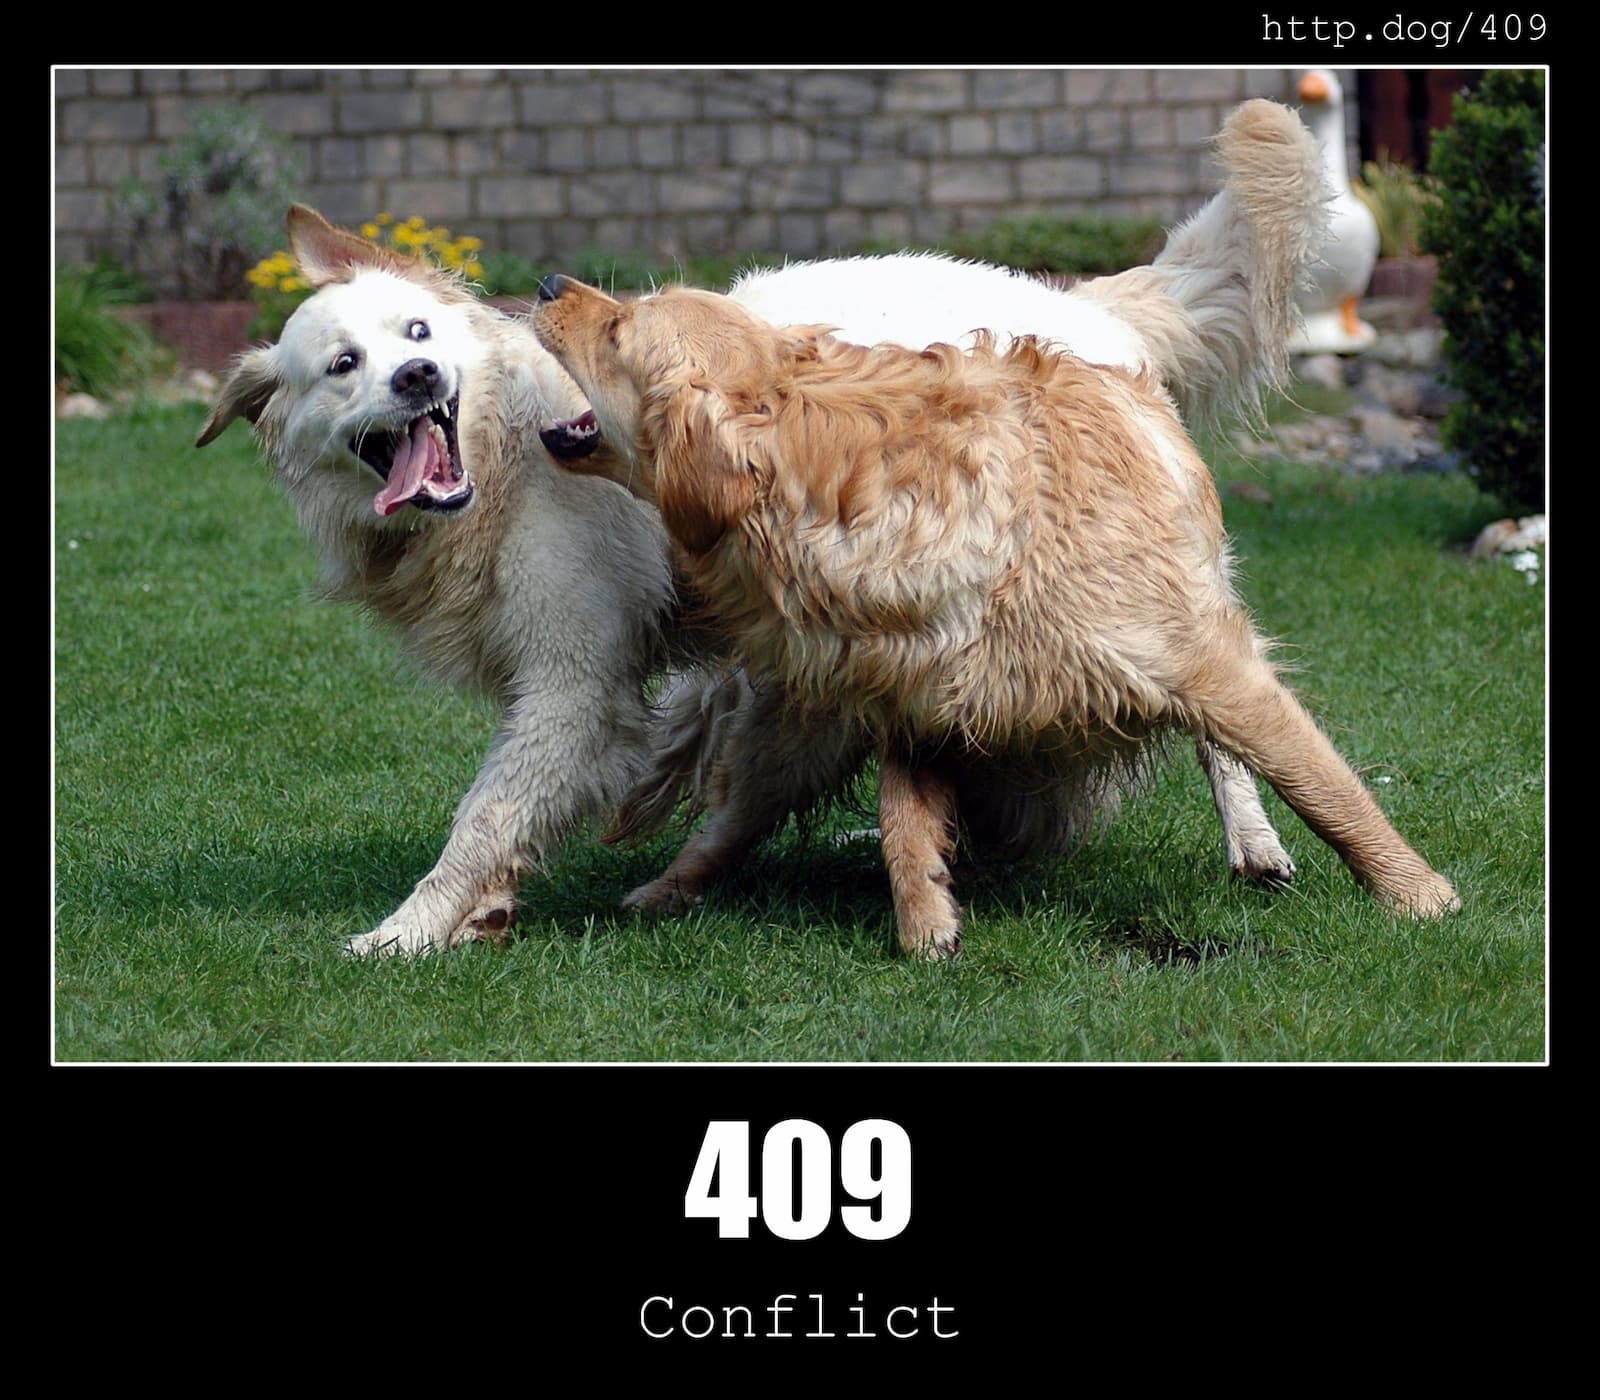 HTTP Status Code 409 Conflict & Dogs